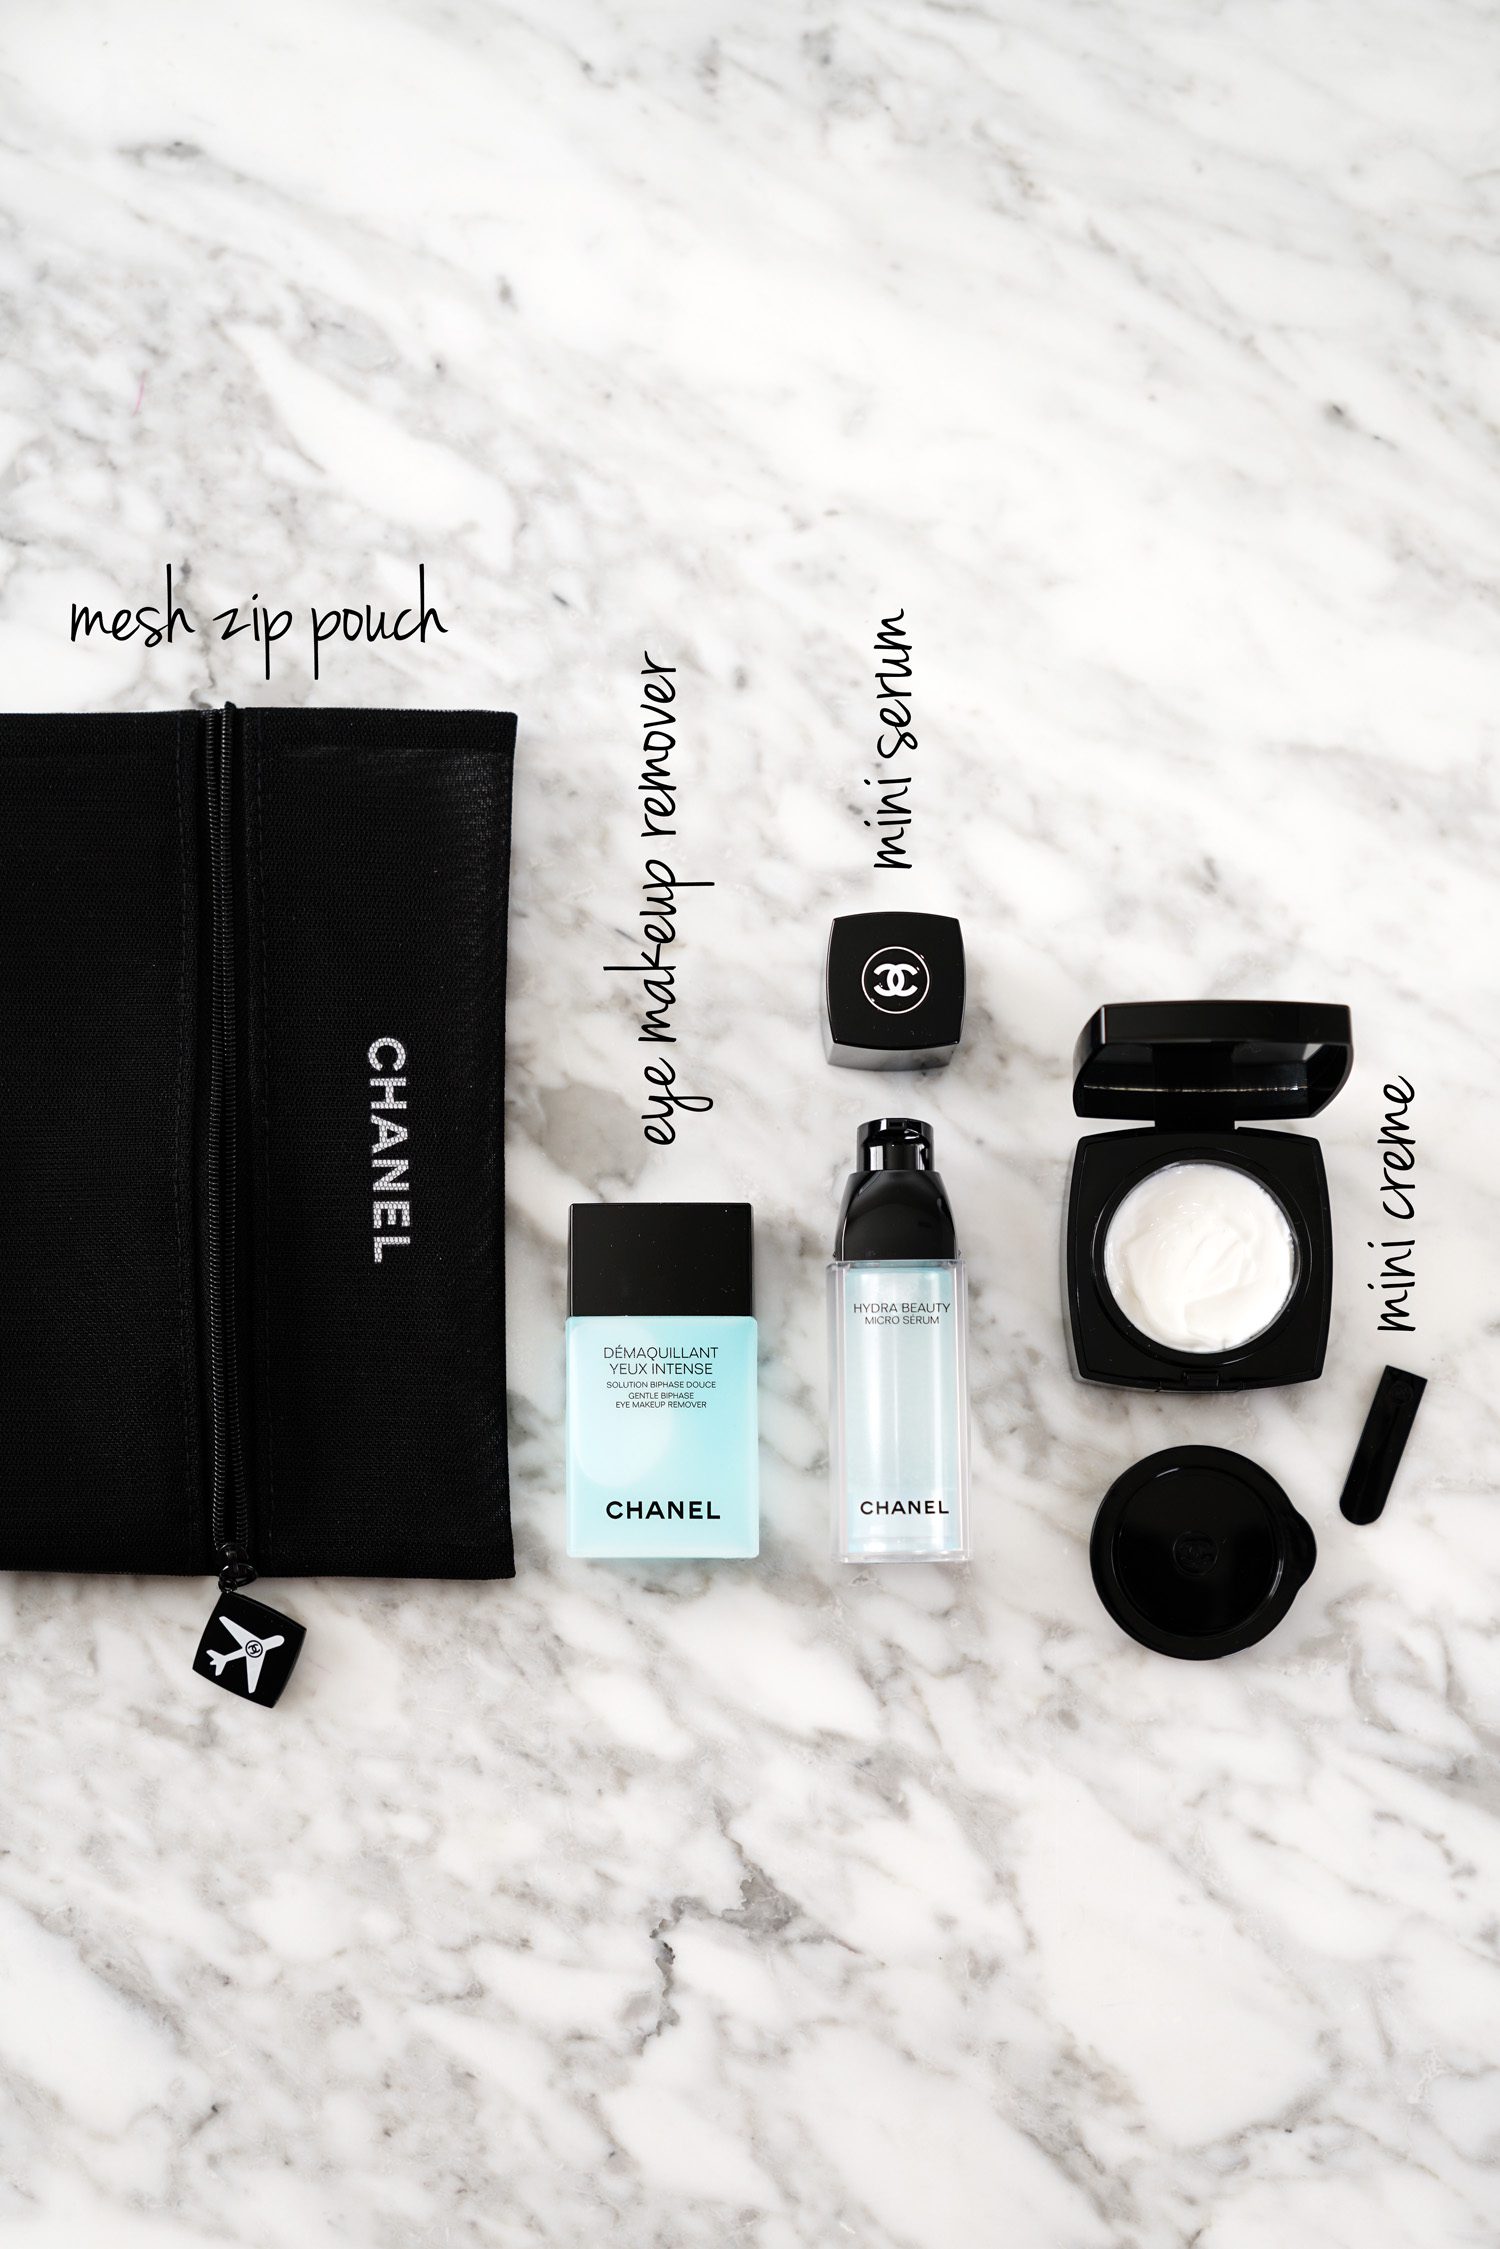 Chanel Hydra Beauty Le Voyage Set + My Top 10 Chanel Favorites